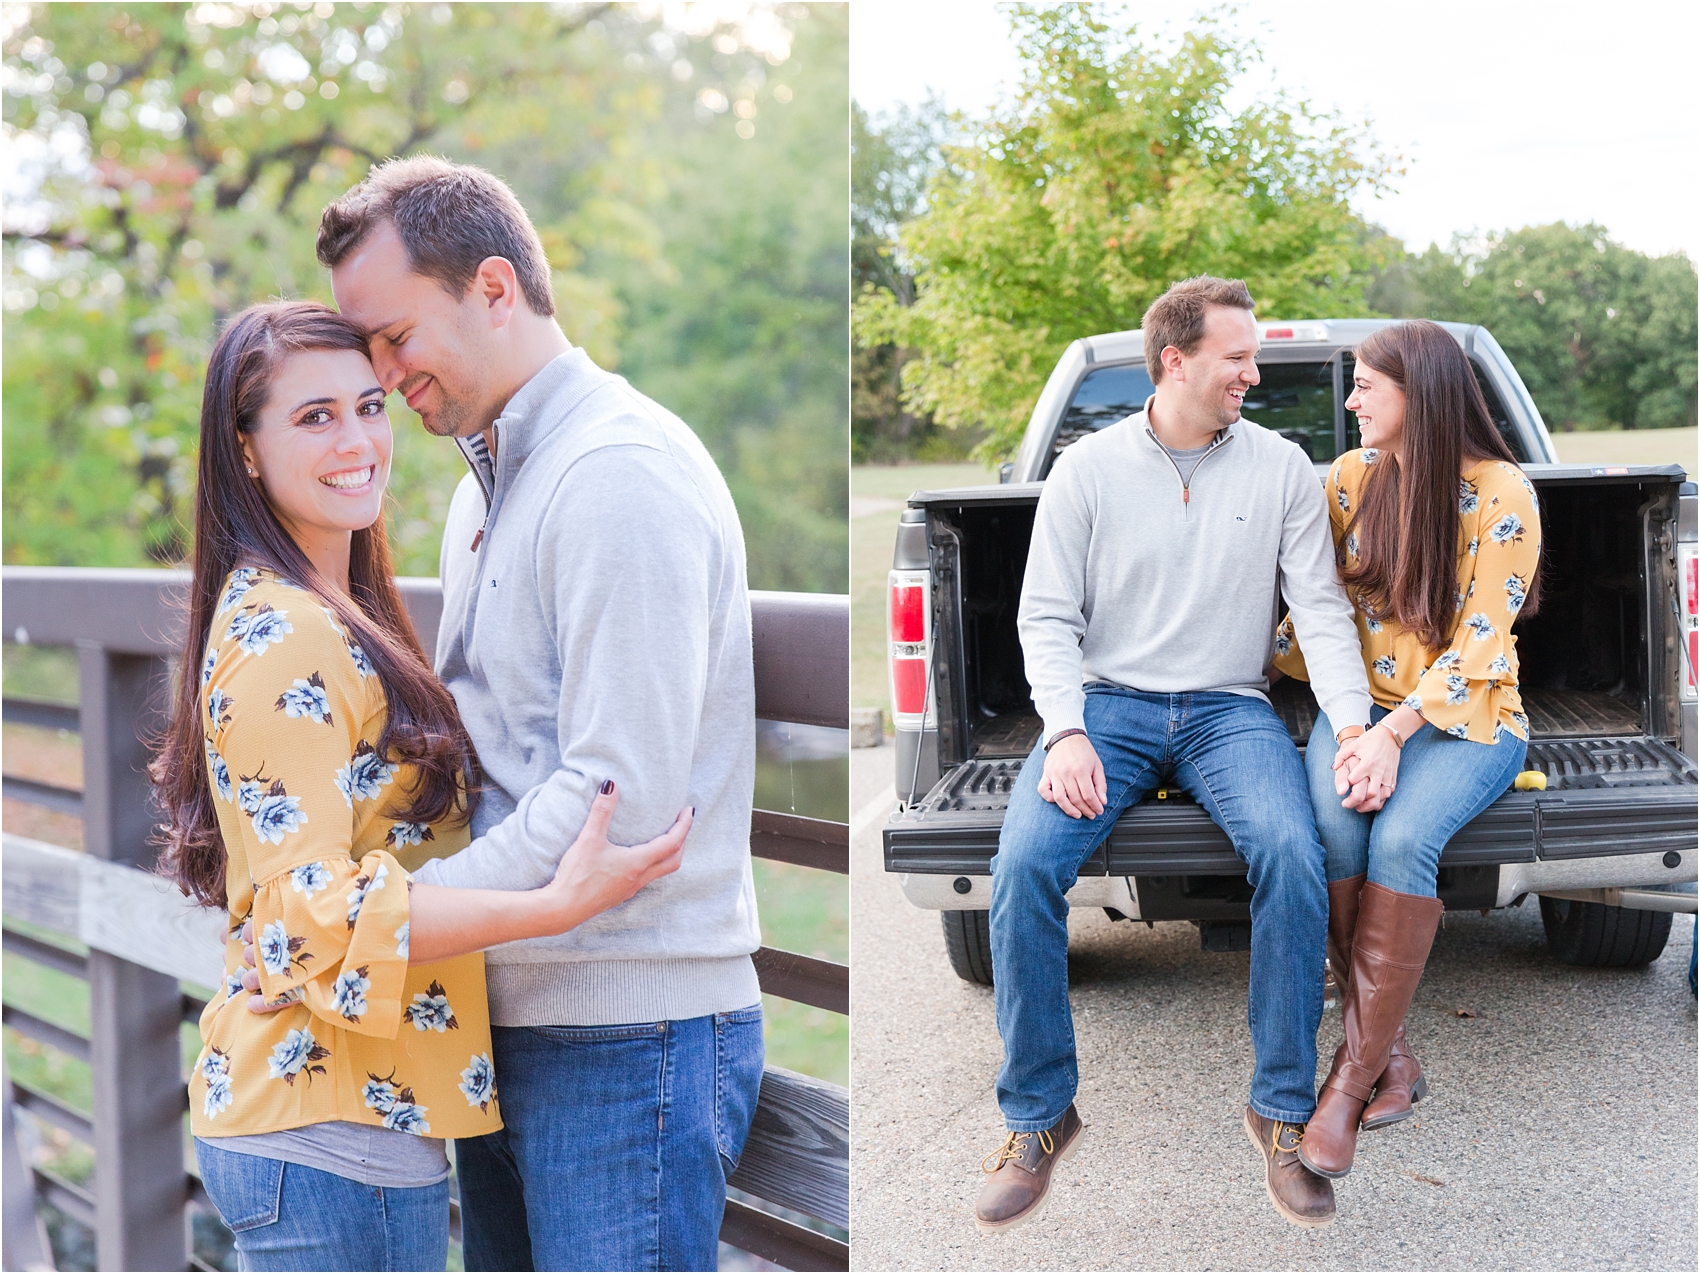 relaxed-autumn-engagement-photos-at-hudson-mills-metropark-in-dexter-mi-by-courtney-carolyn-photography_0041.jpg